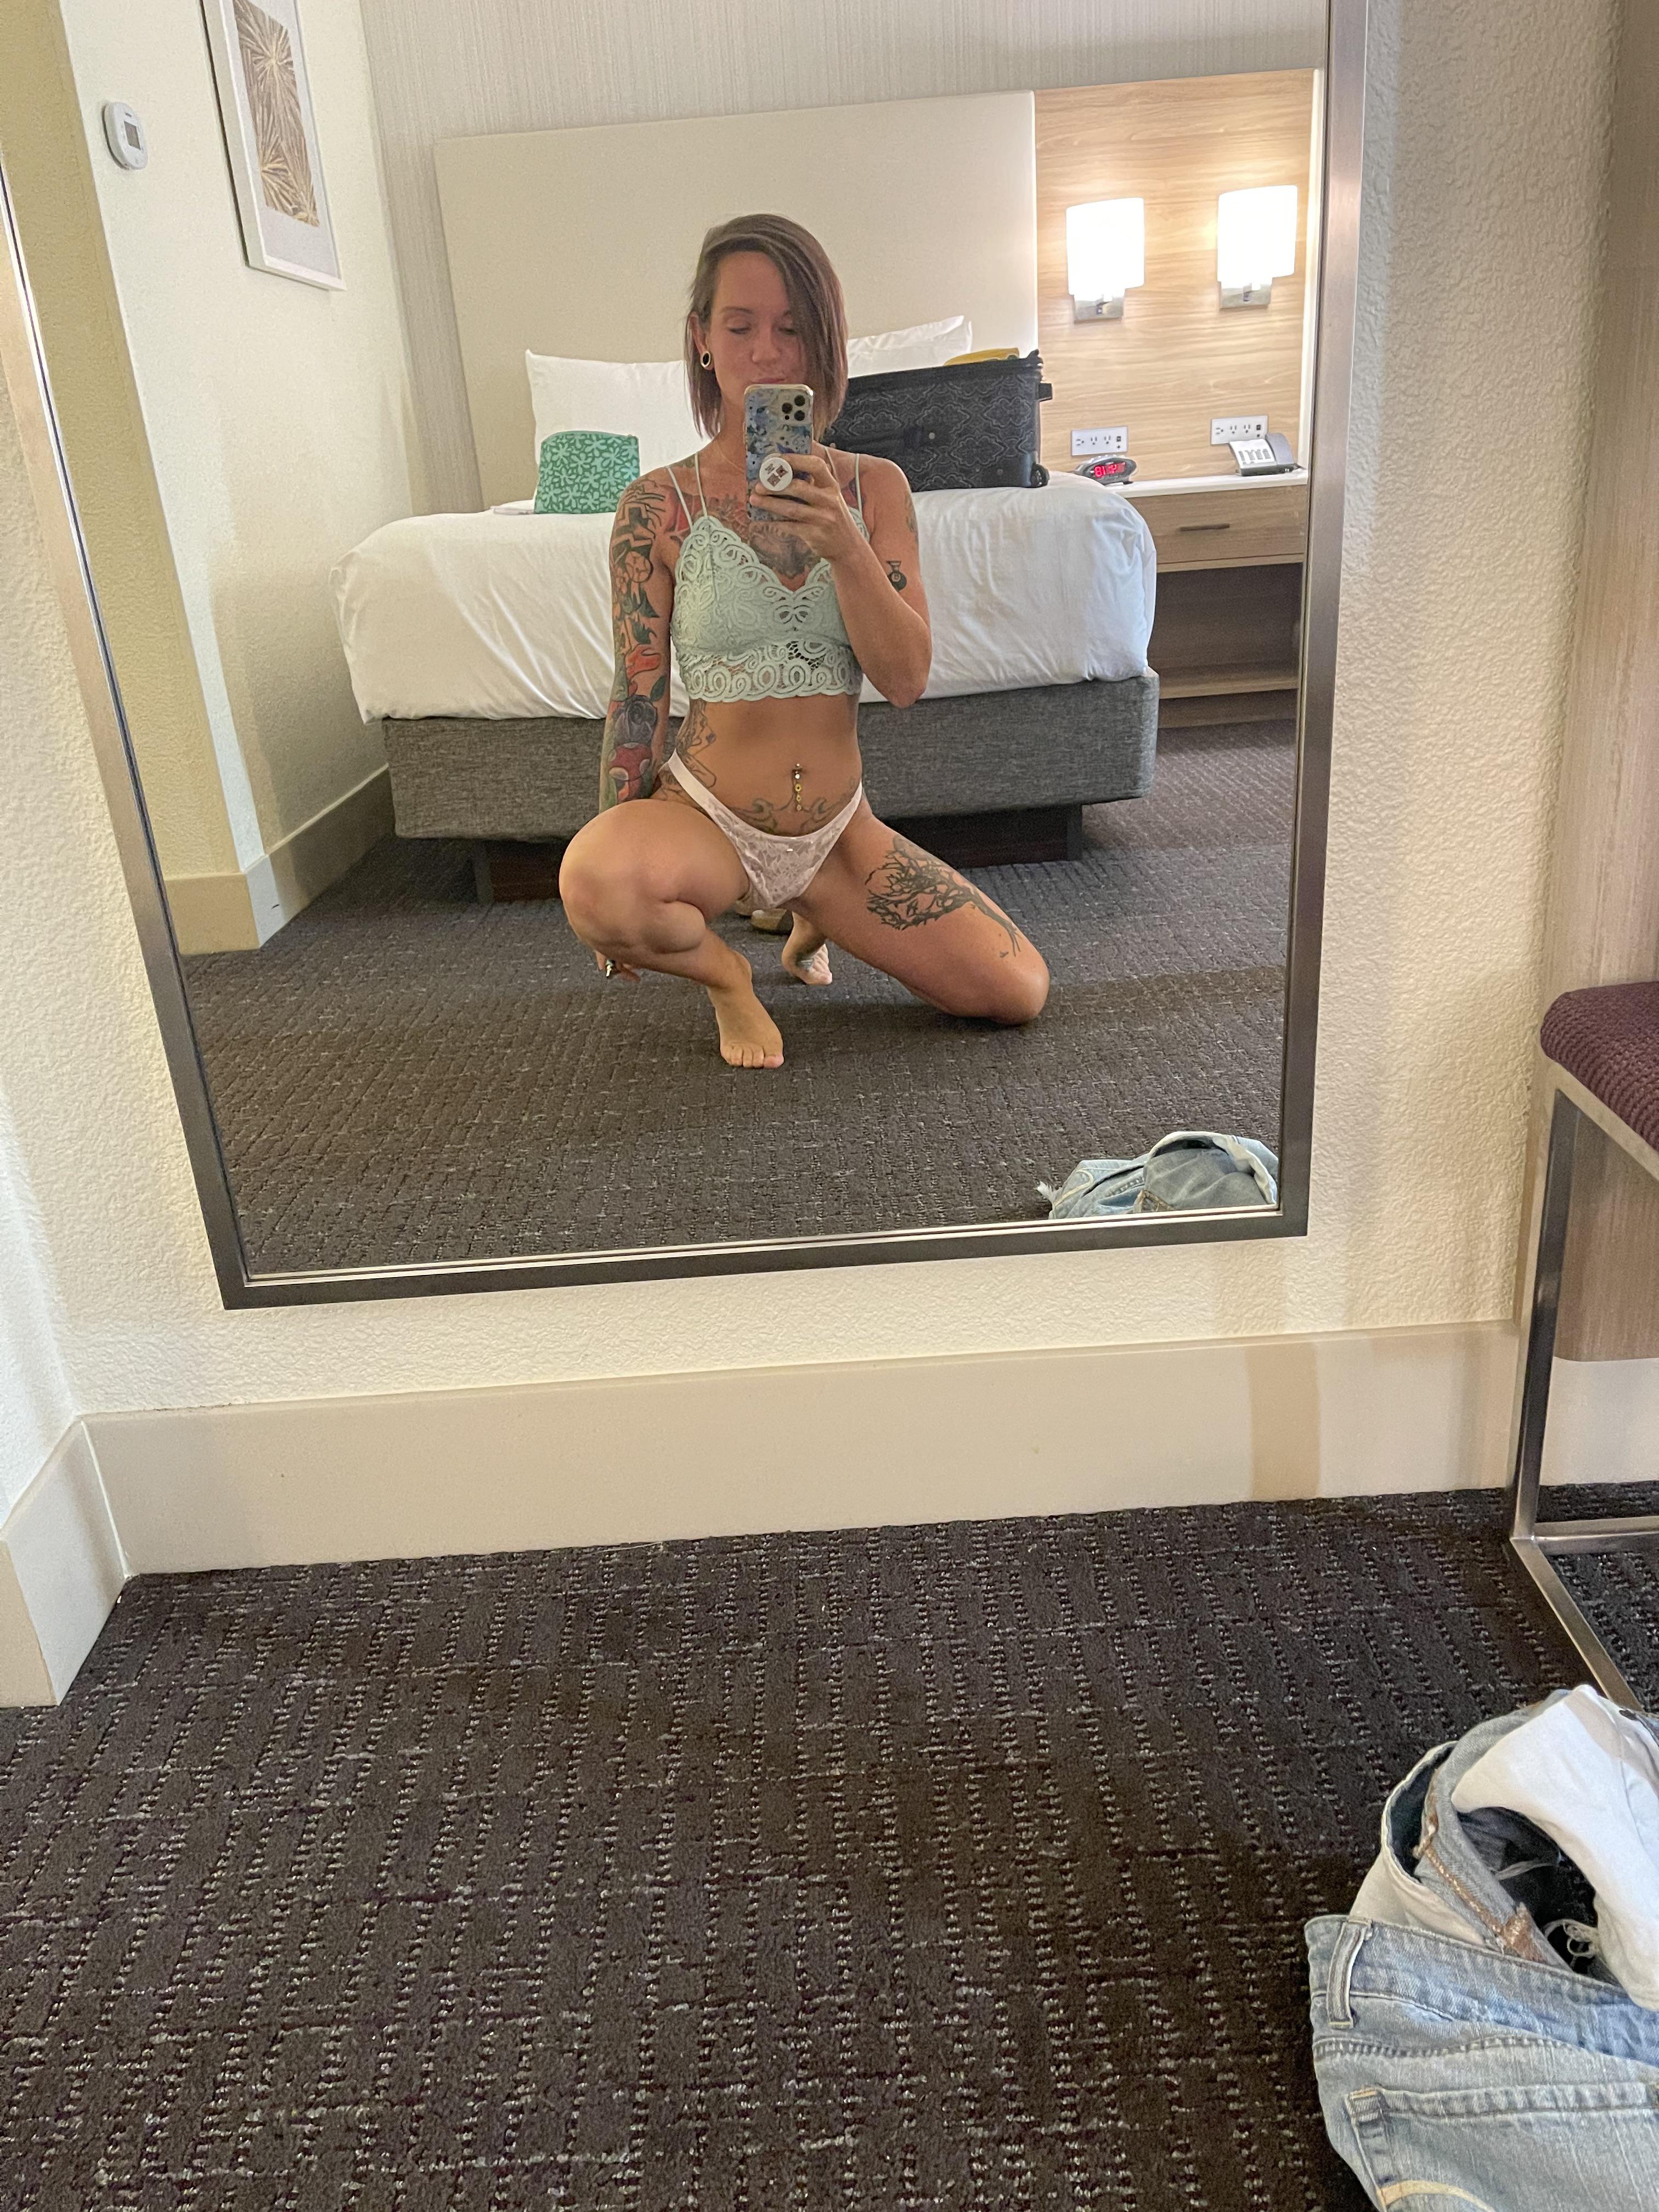 My husband got me a hotel for someone else to join in. ?? [31F]